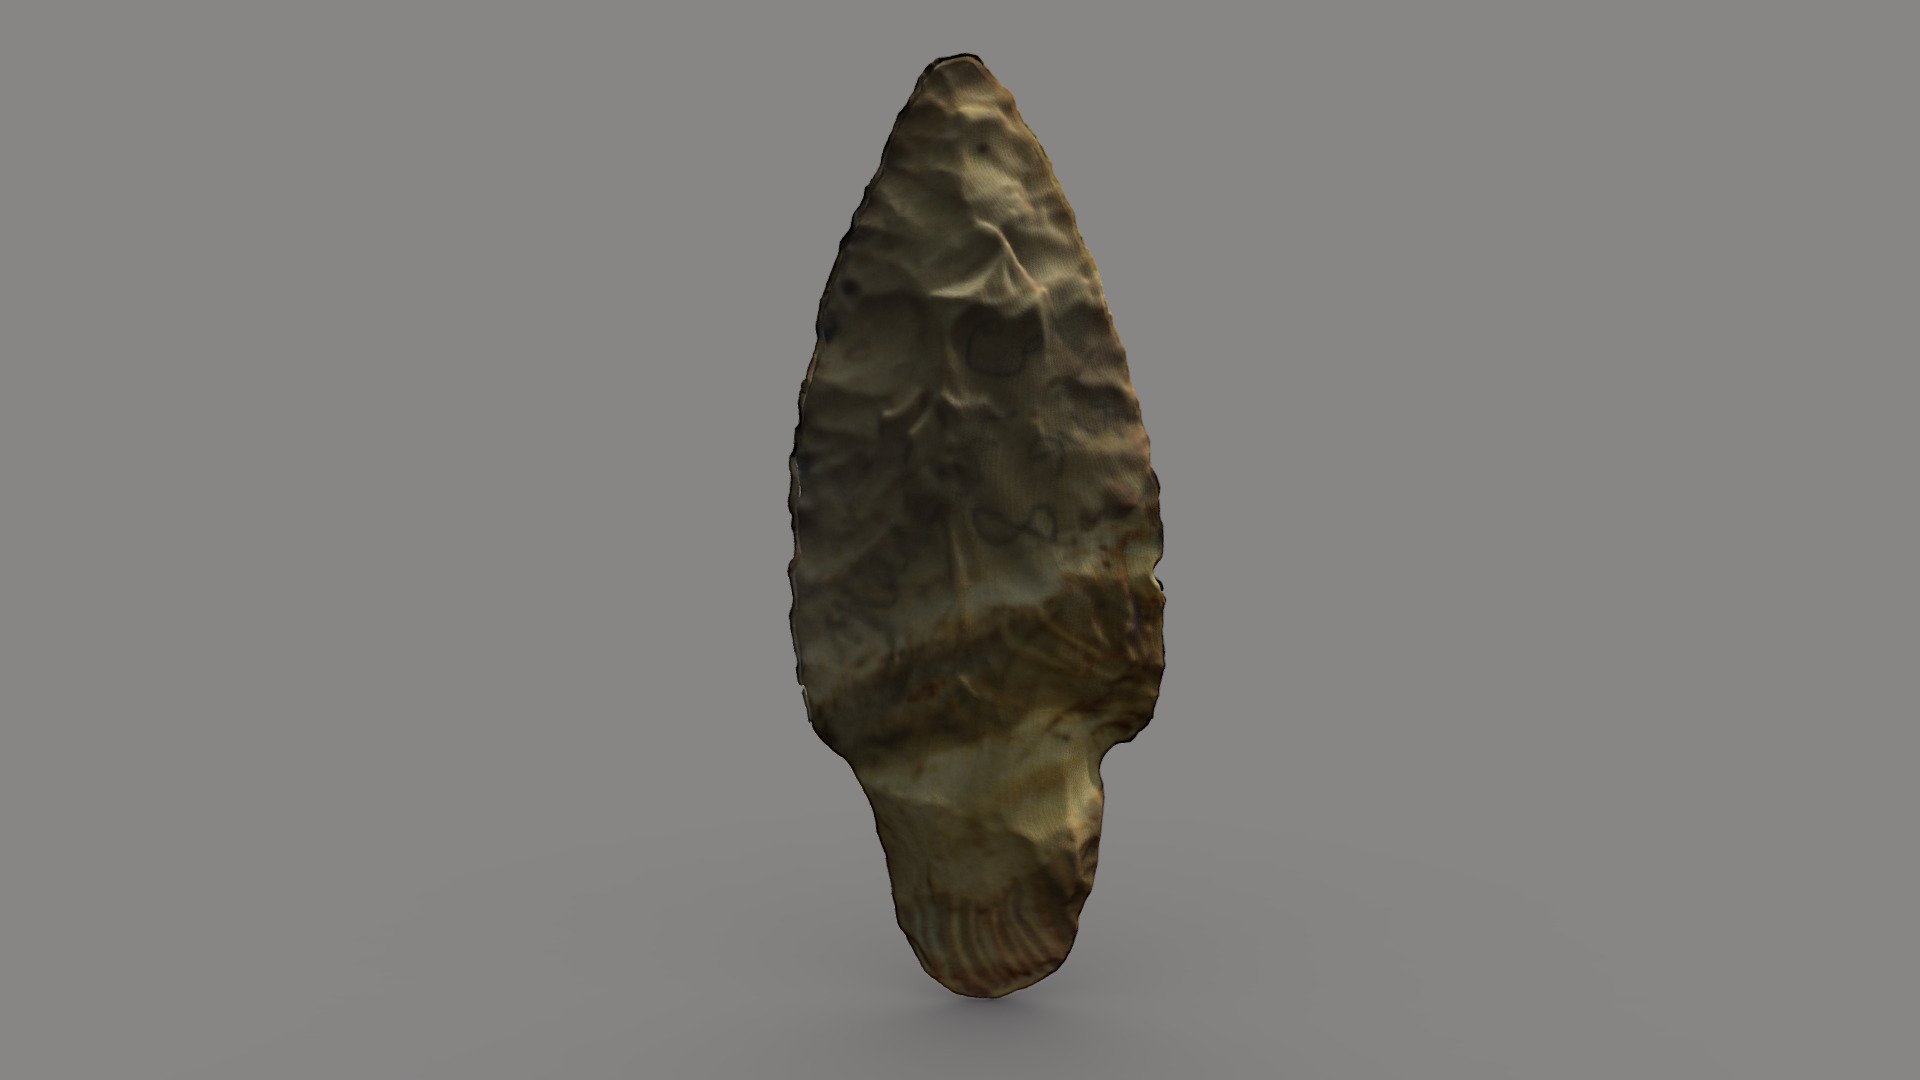 Adena Projectile Point